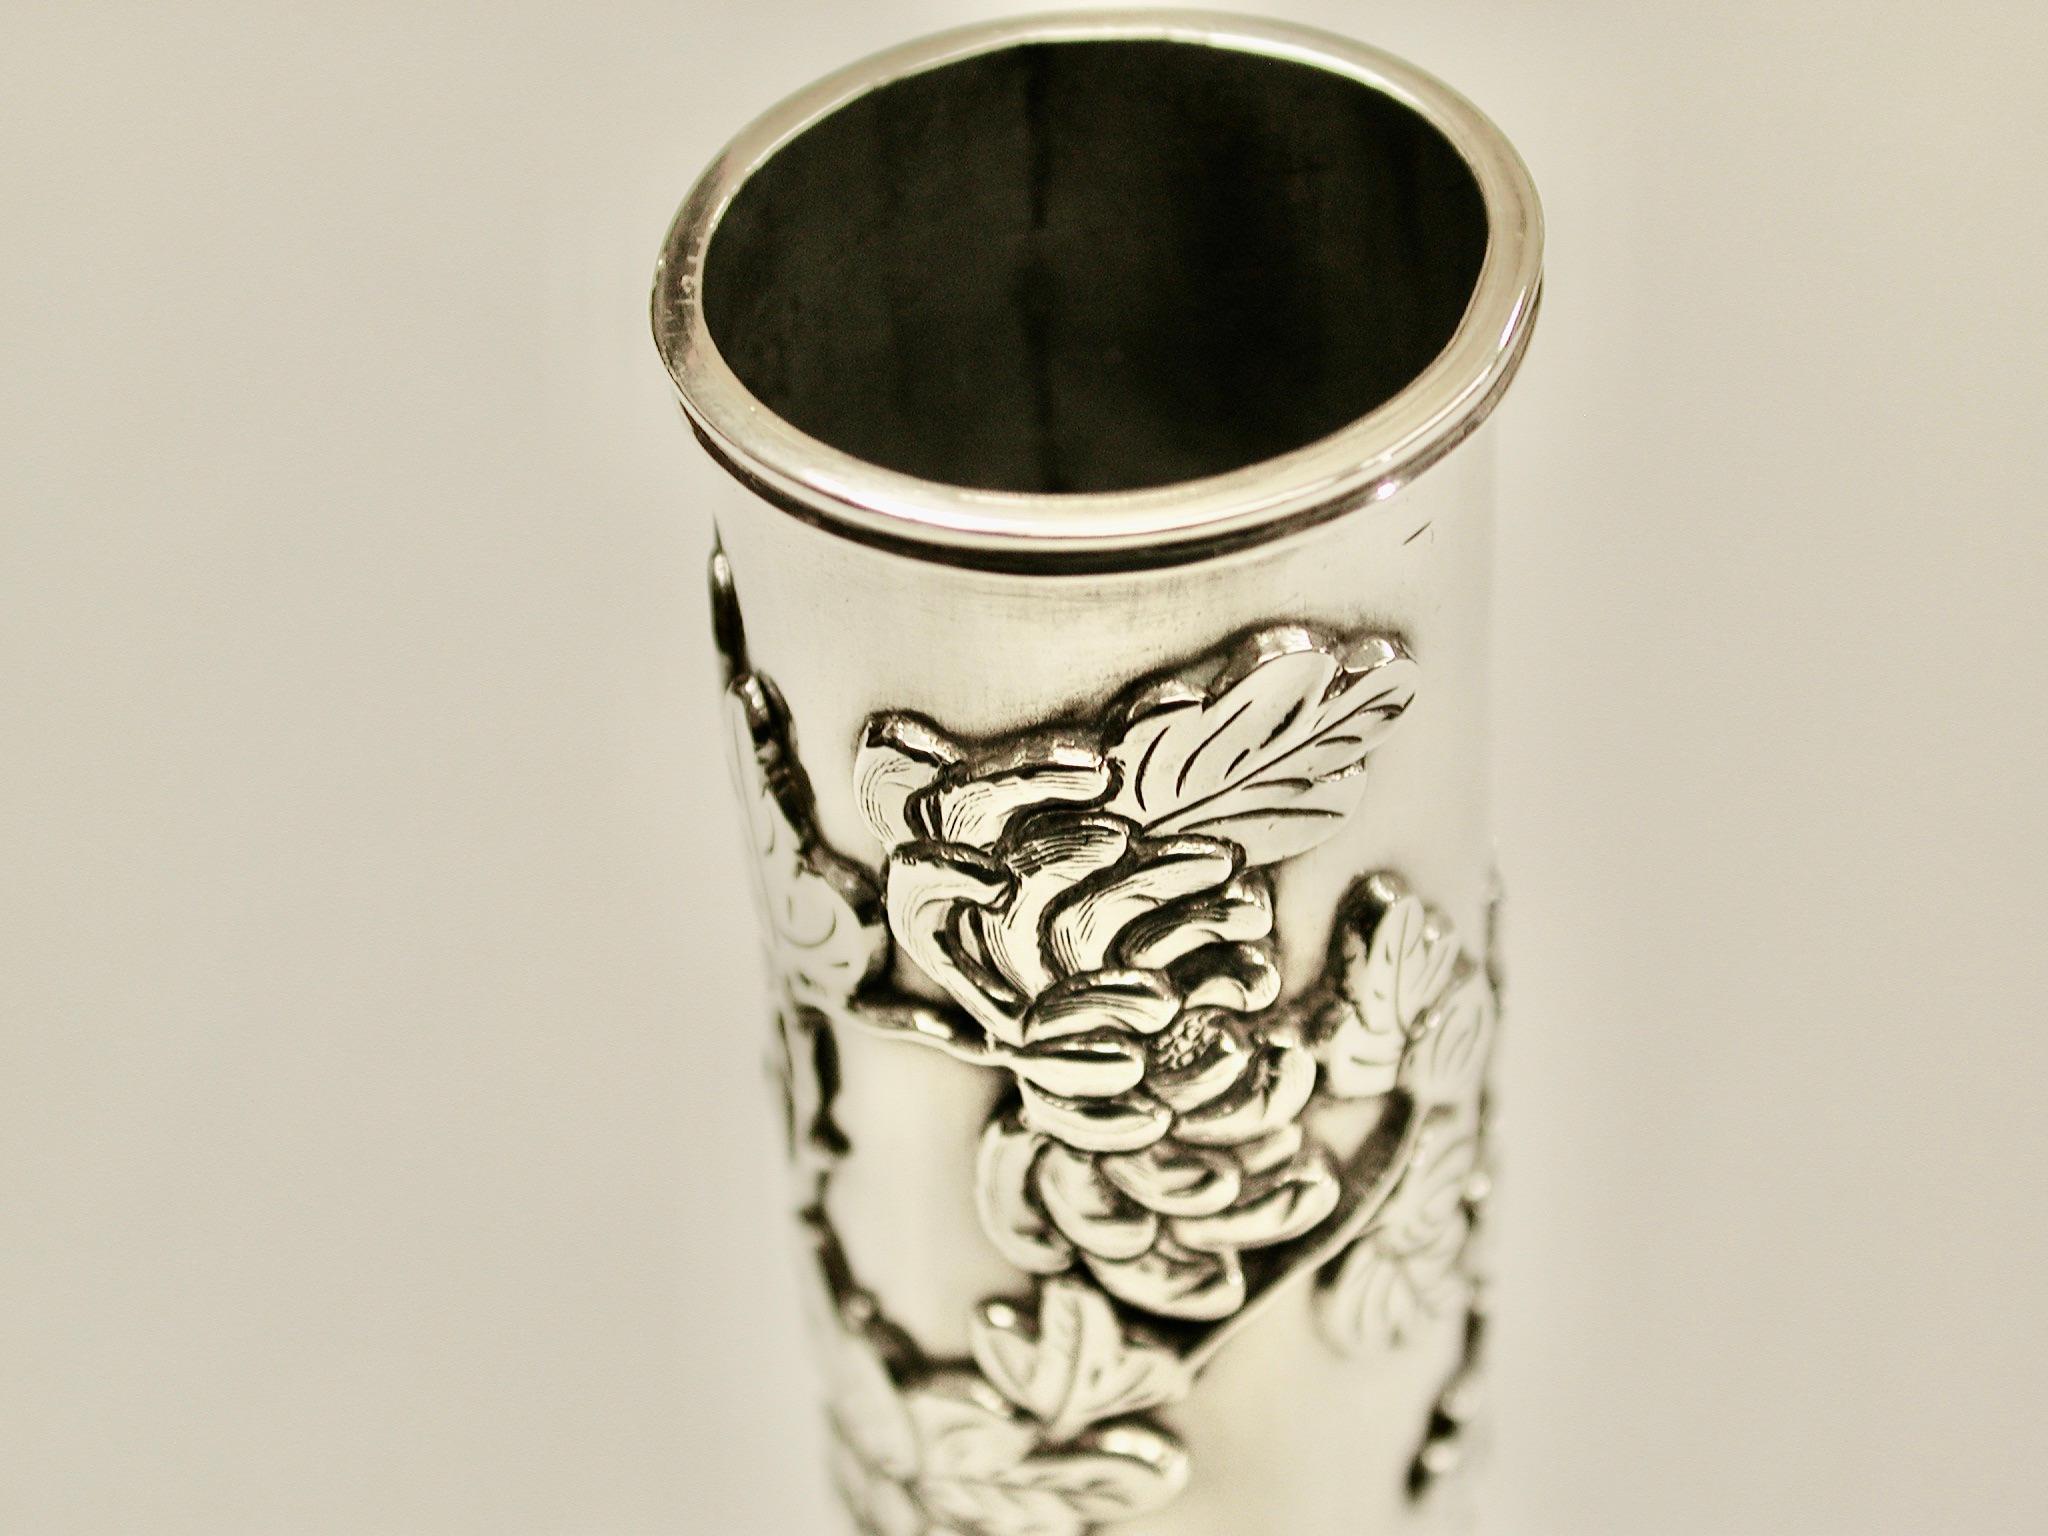 Chinese silver bud vase decorated with Chrysanthemum and bamboo feet, circa 1890
Made by Wing Chun of Hong Kong.